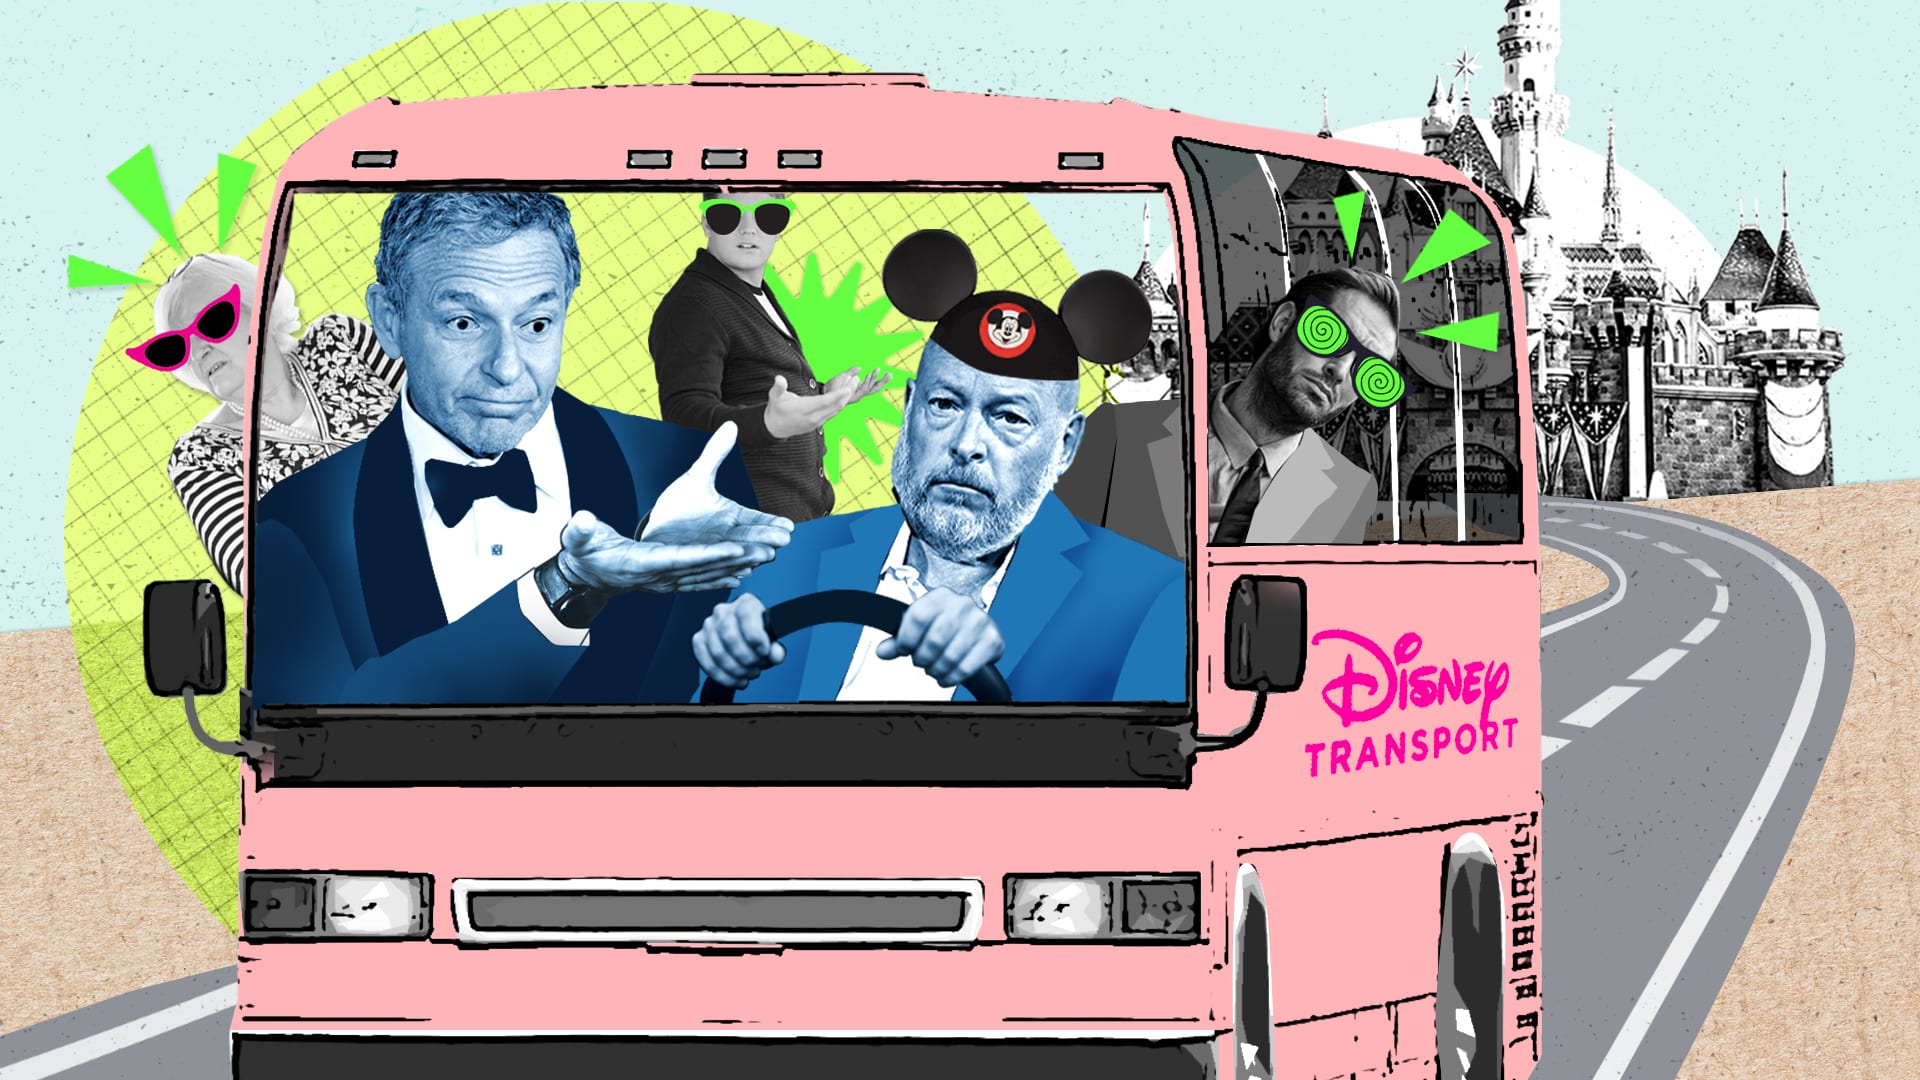 Disney’s wildest ride: Iger, Chapek and the making of an epic succession mess